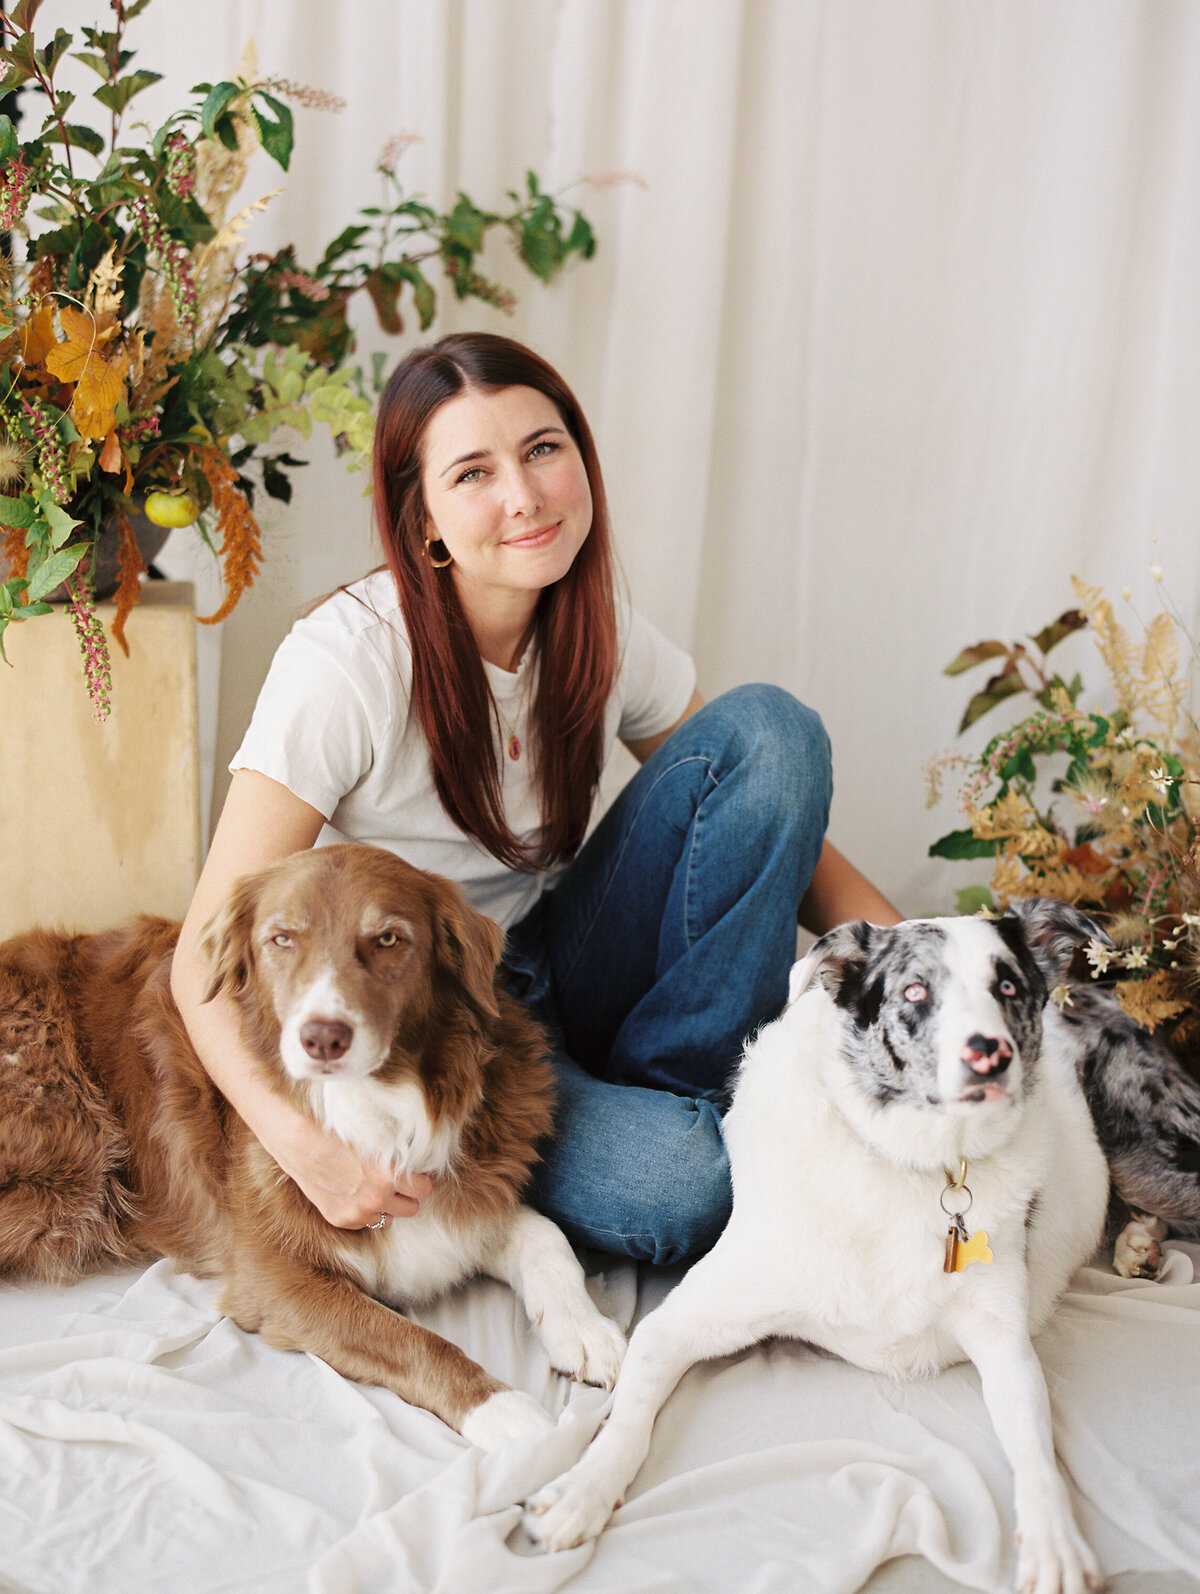 Studio photo of a woman with her two dogs with florals and greenery in the background